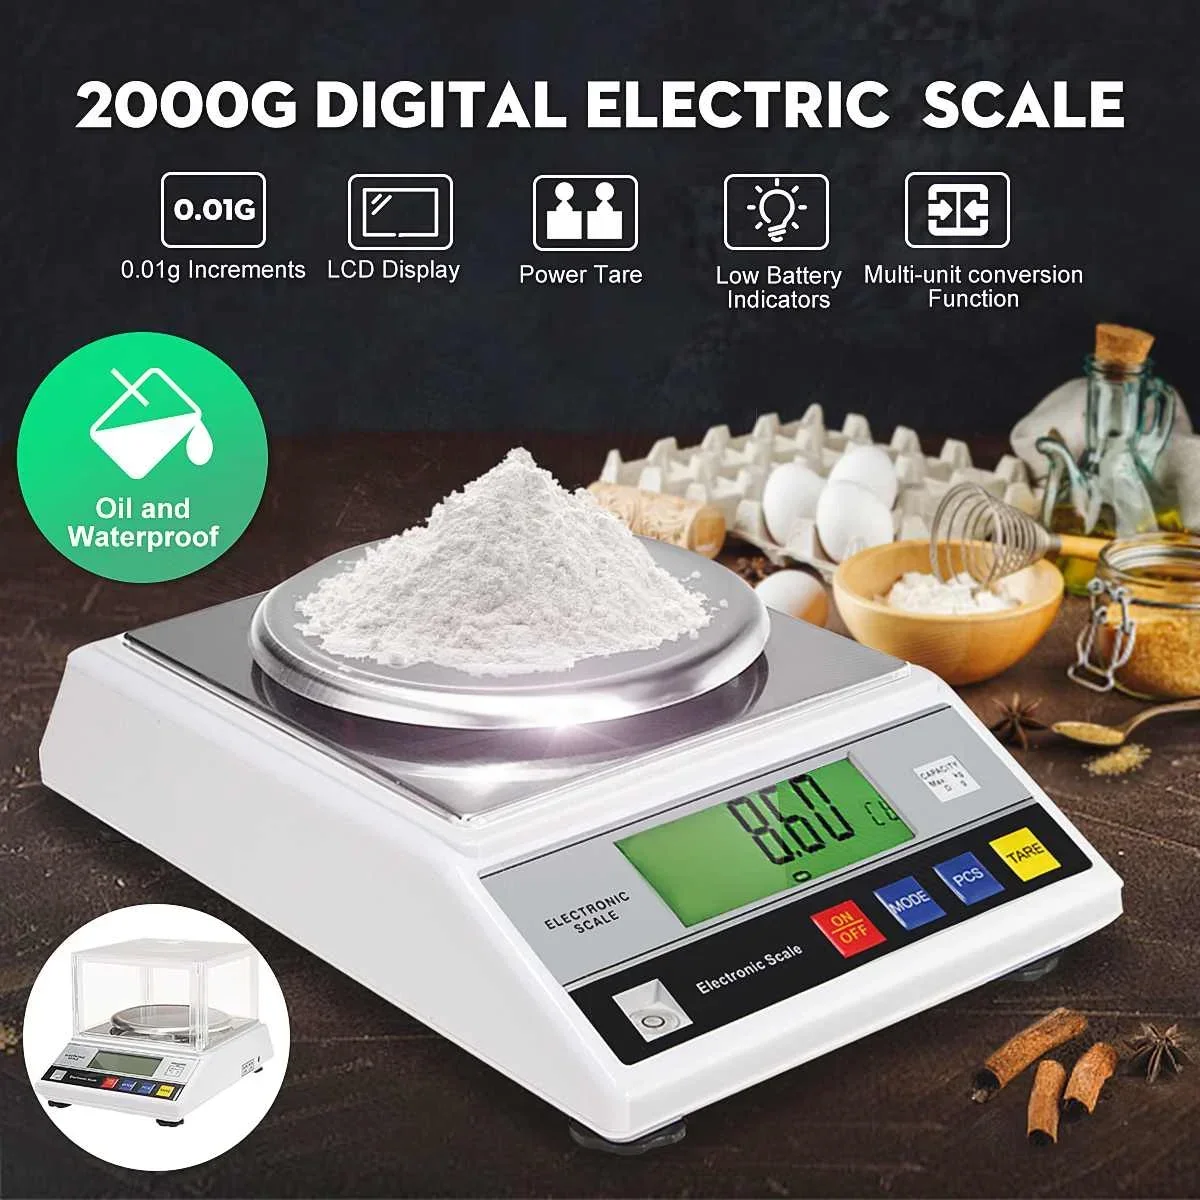 

2000g/0.01g Electronic Digital Scale Precision Backlight LCD Display LB Gram Food Kitchen Weight Balance Tray High Accuracy 2kg